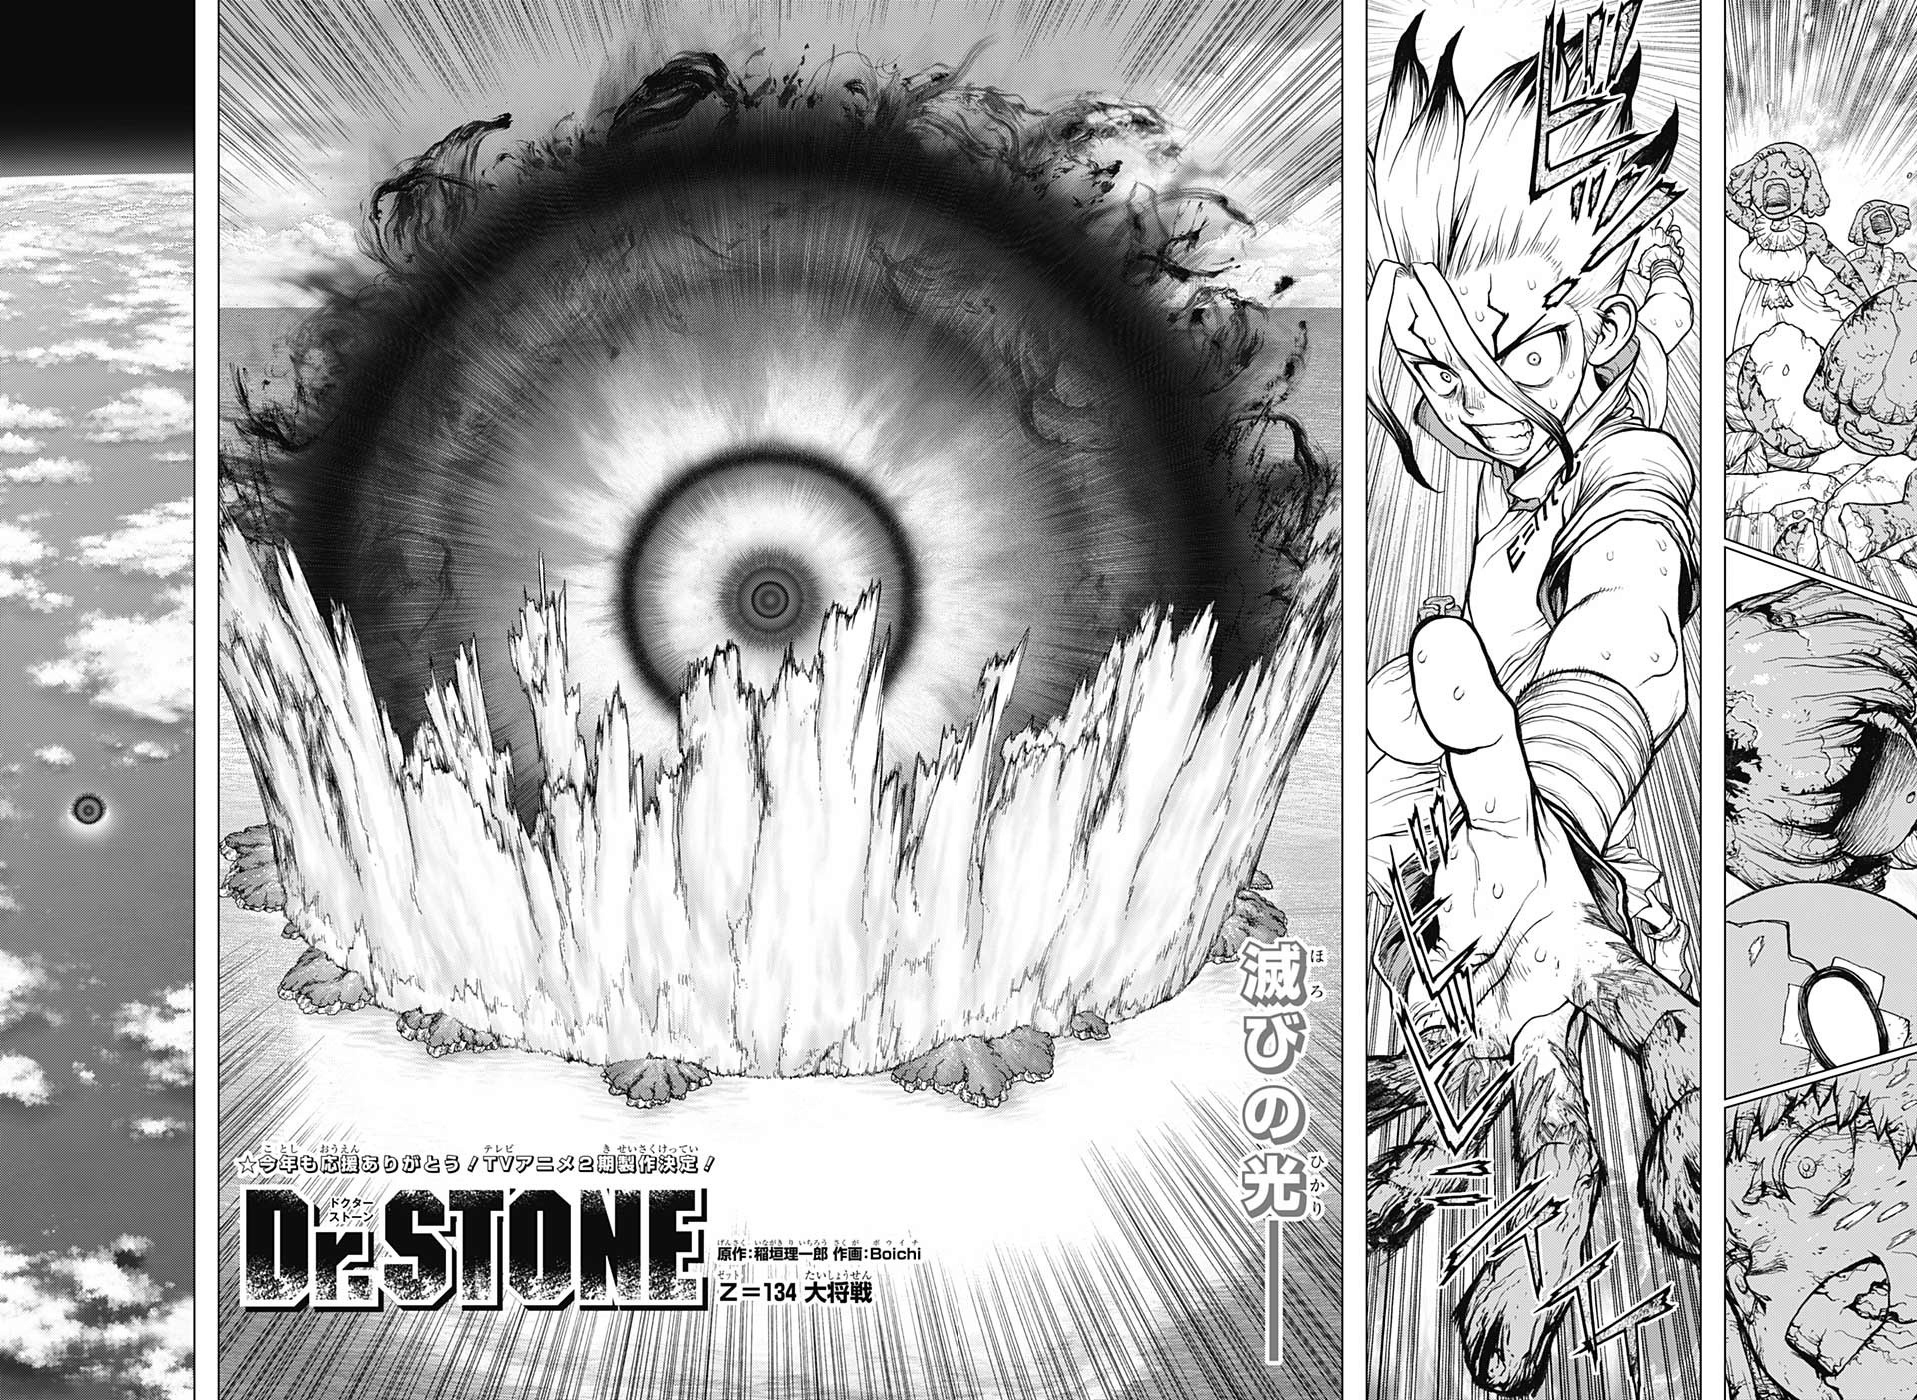 Dr. STONE - The wait is finally OVER! Dr. Stone Season 2 is here